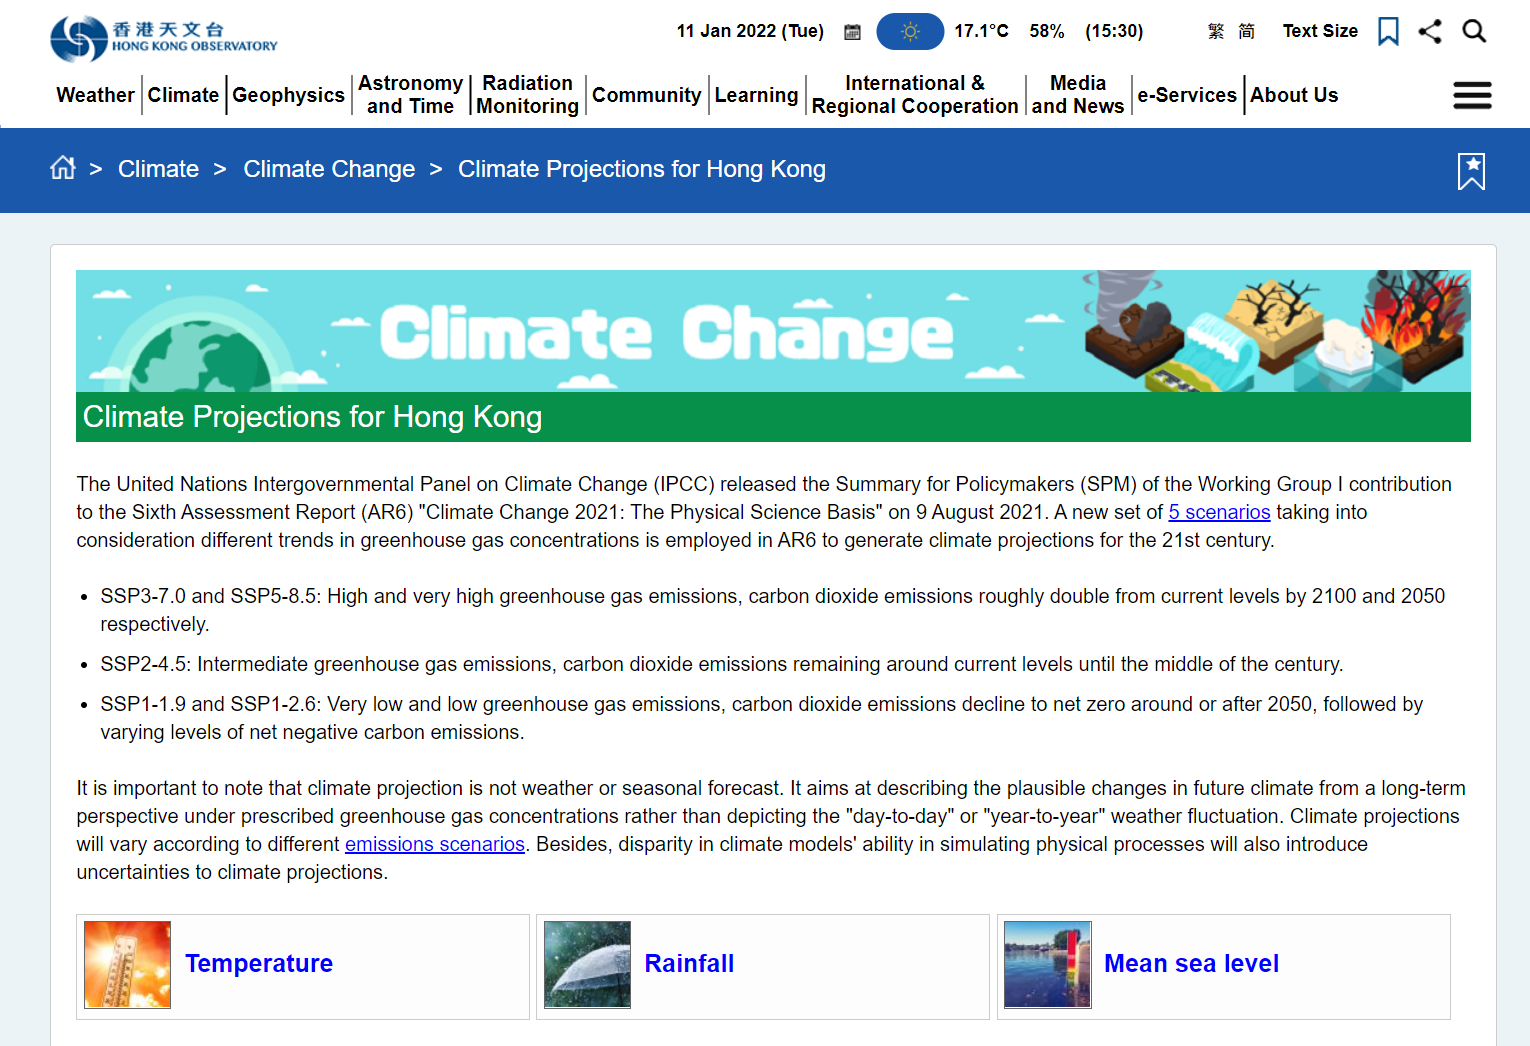 Climate Projections for Hong Kong webpage